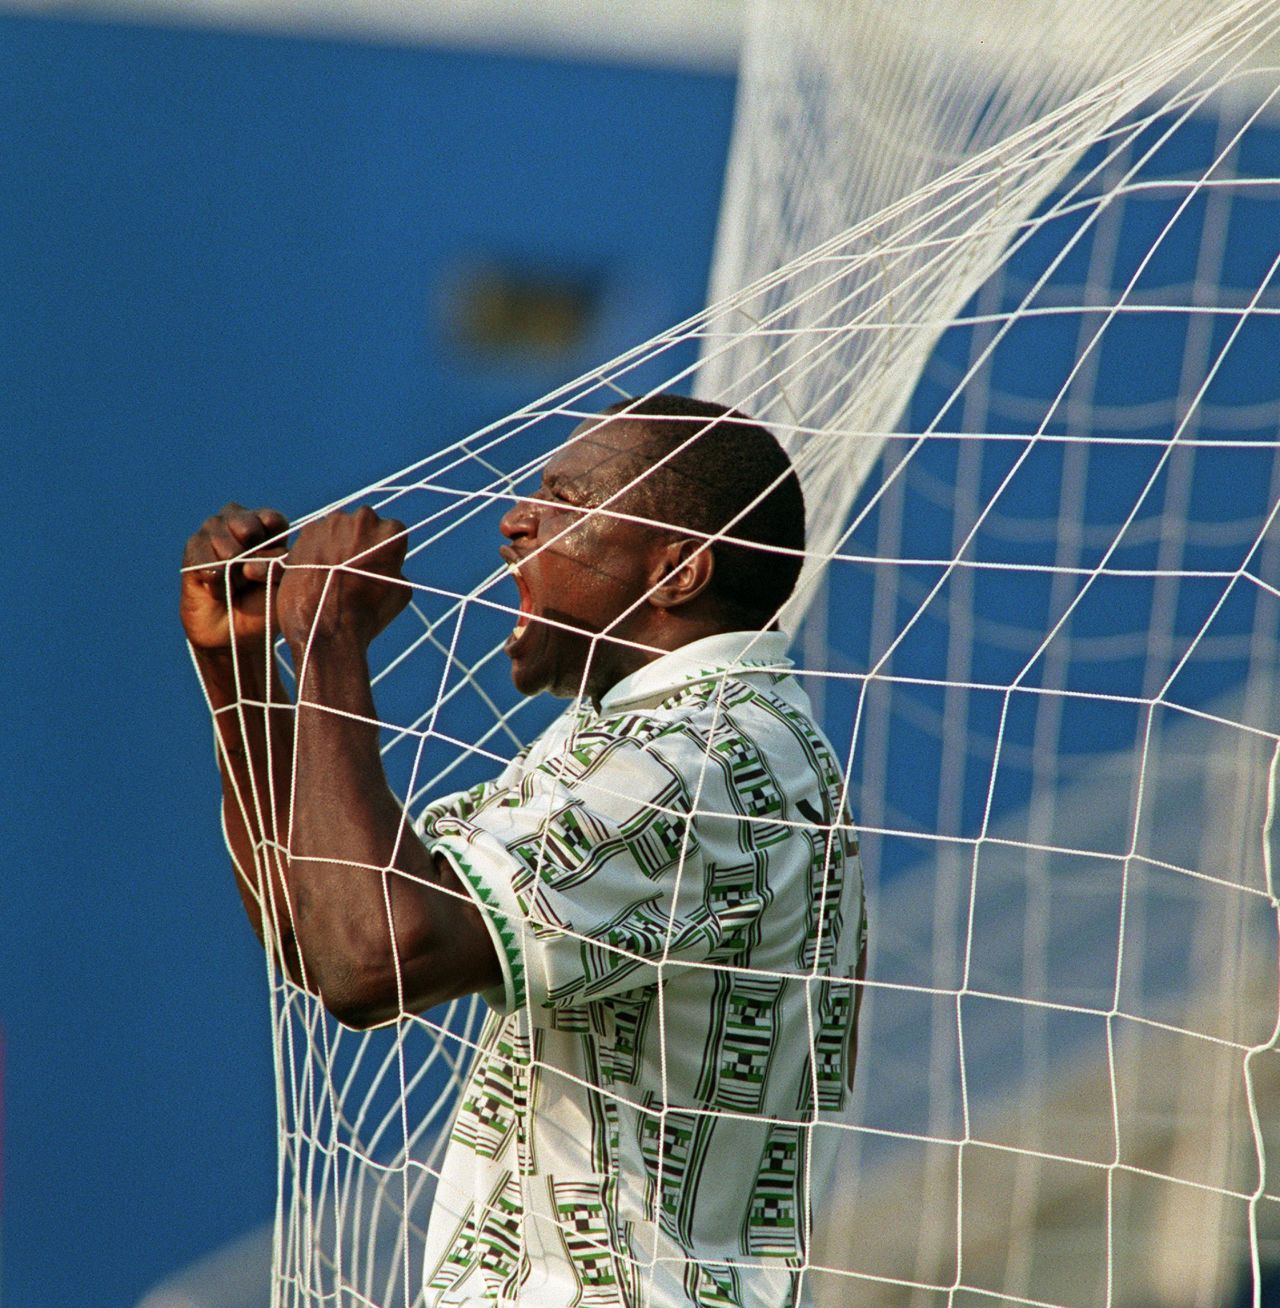 Nigeria reached the last 16 in 1994 at their debut World Cup. Rashidi Yekini celebrates after his side score their first goal of the campaign against Bulgaria.